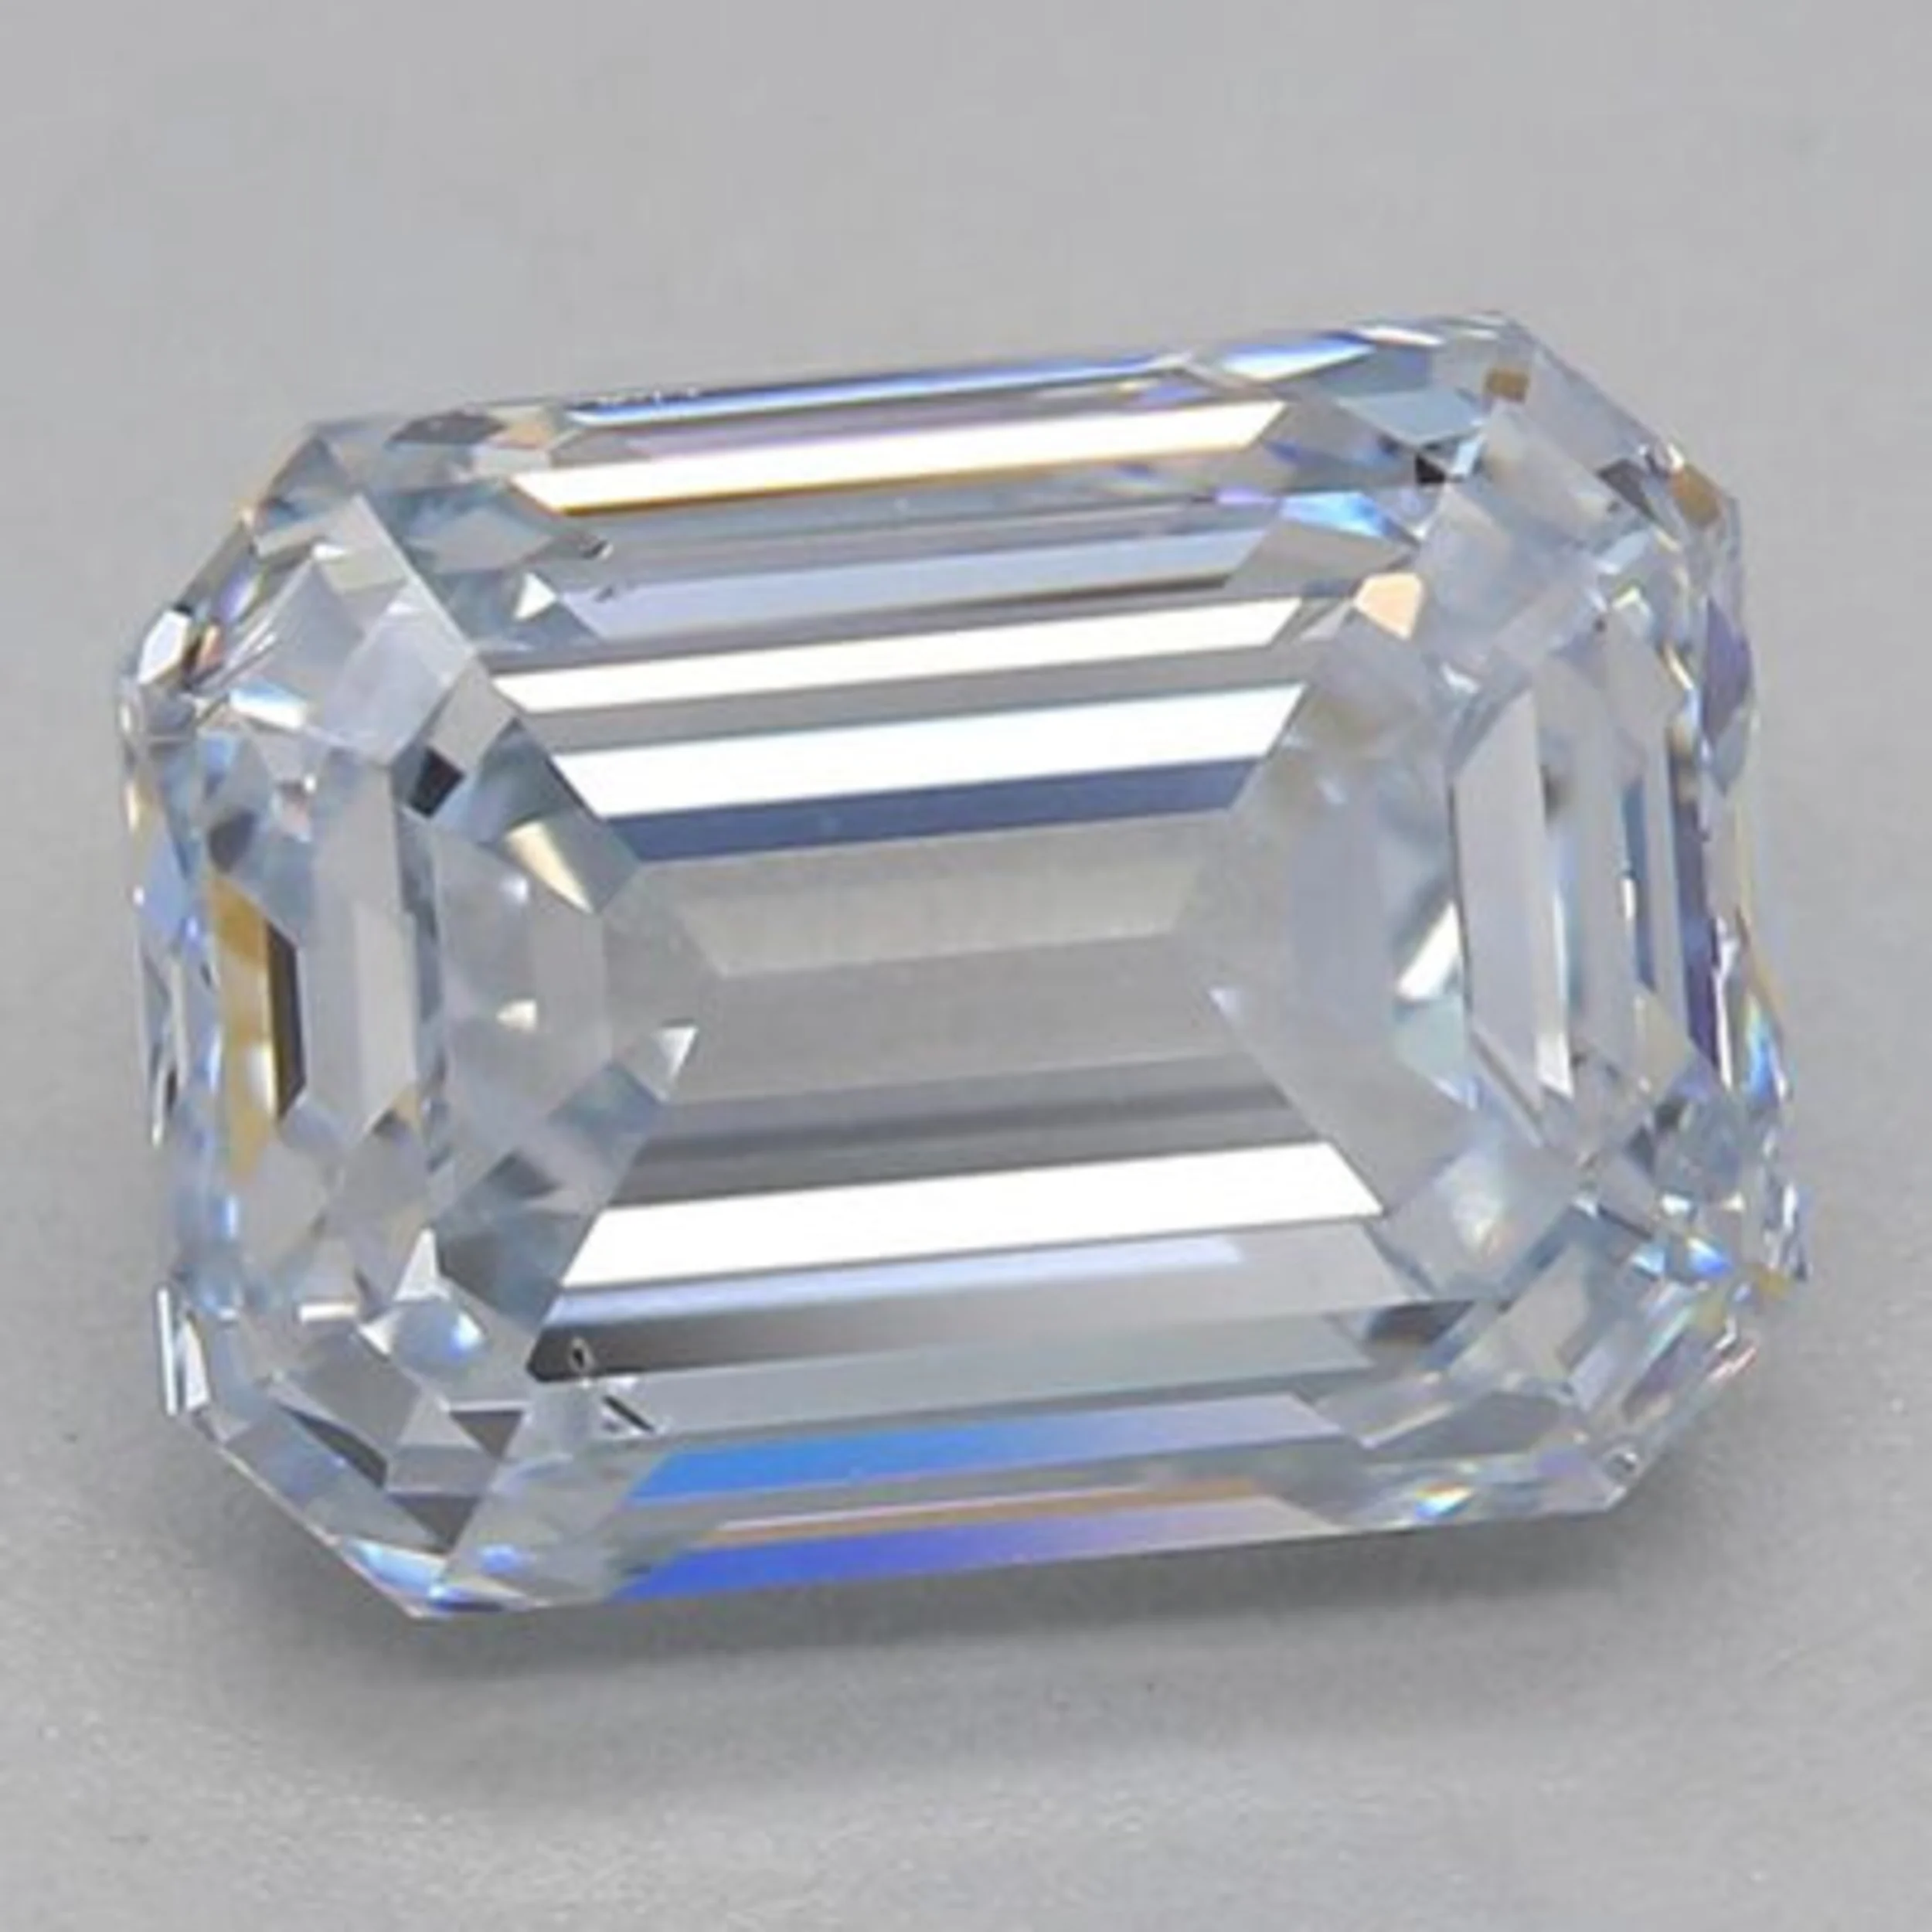 An HPHT grown emerald cut with blue nuance. This diamond received an H color grading from IGI.